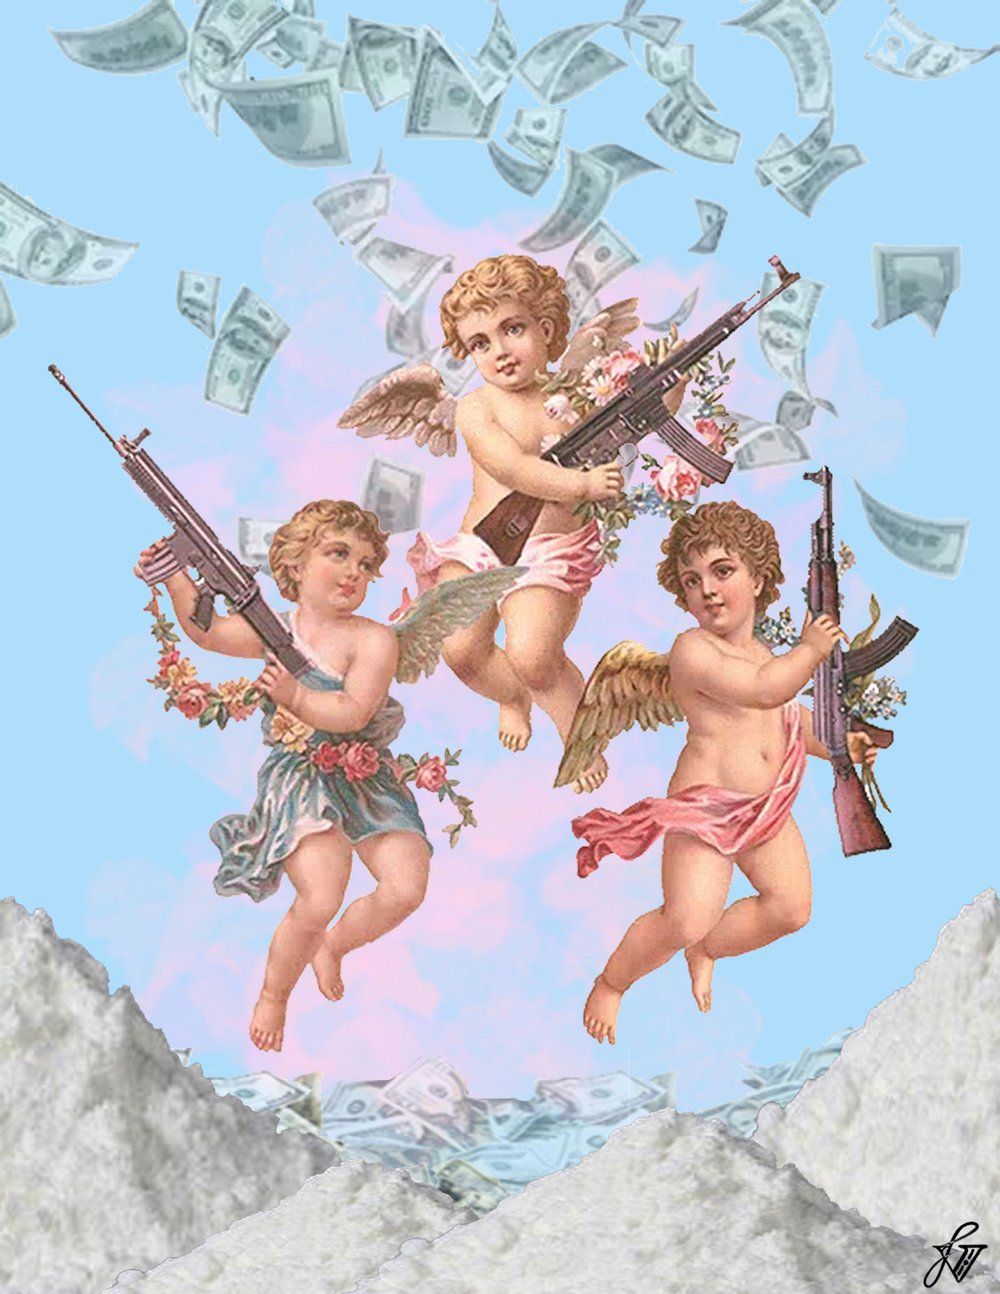 Three Cherubs in the sky with guns and money - Cupid